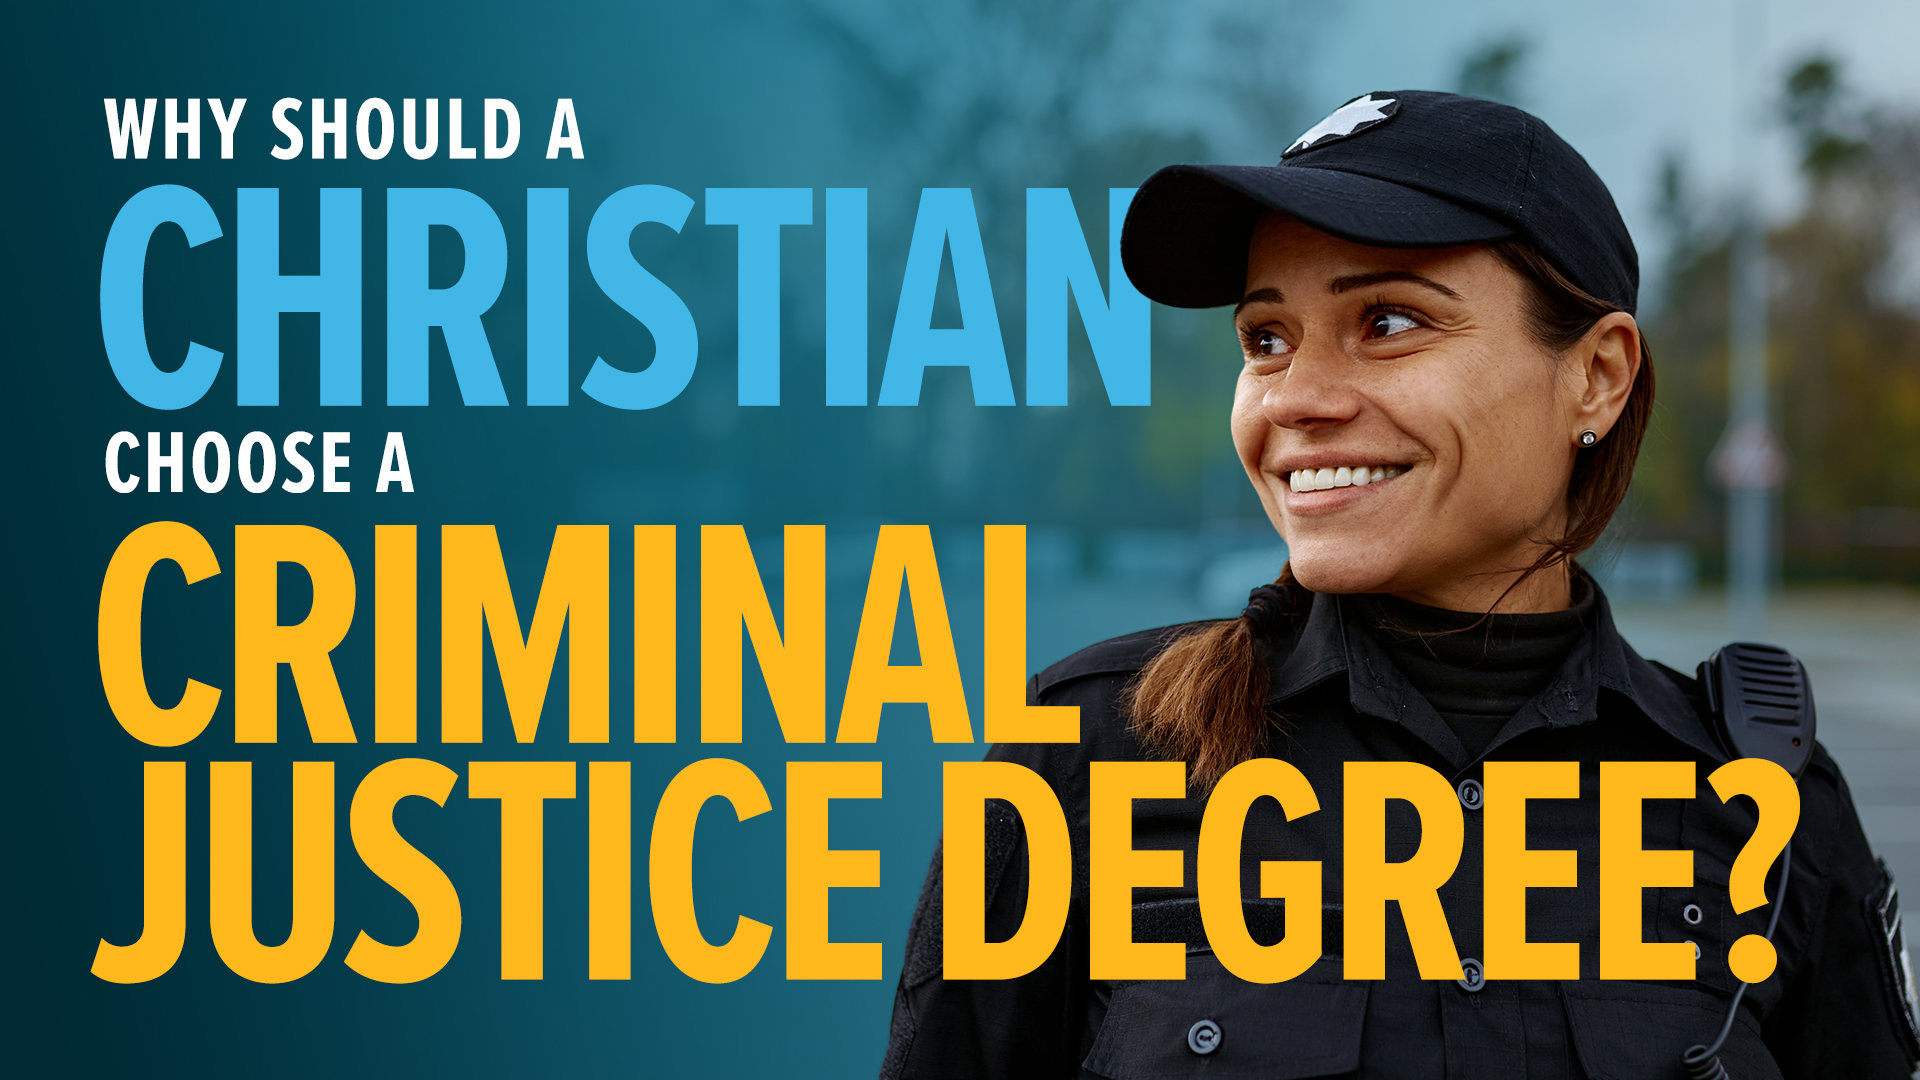 Why Should a Christian Choose a Criminal Justice Degree?